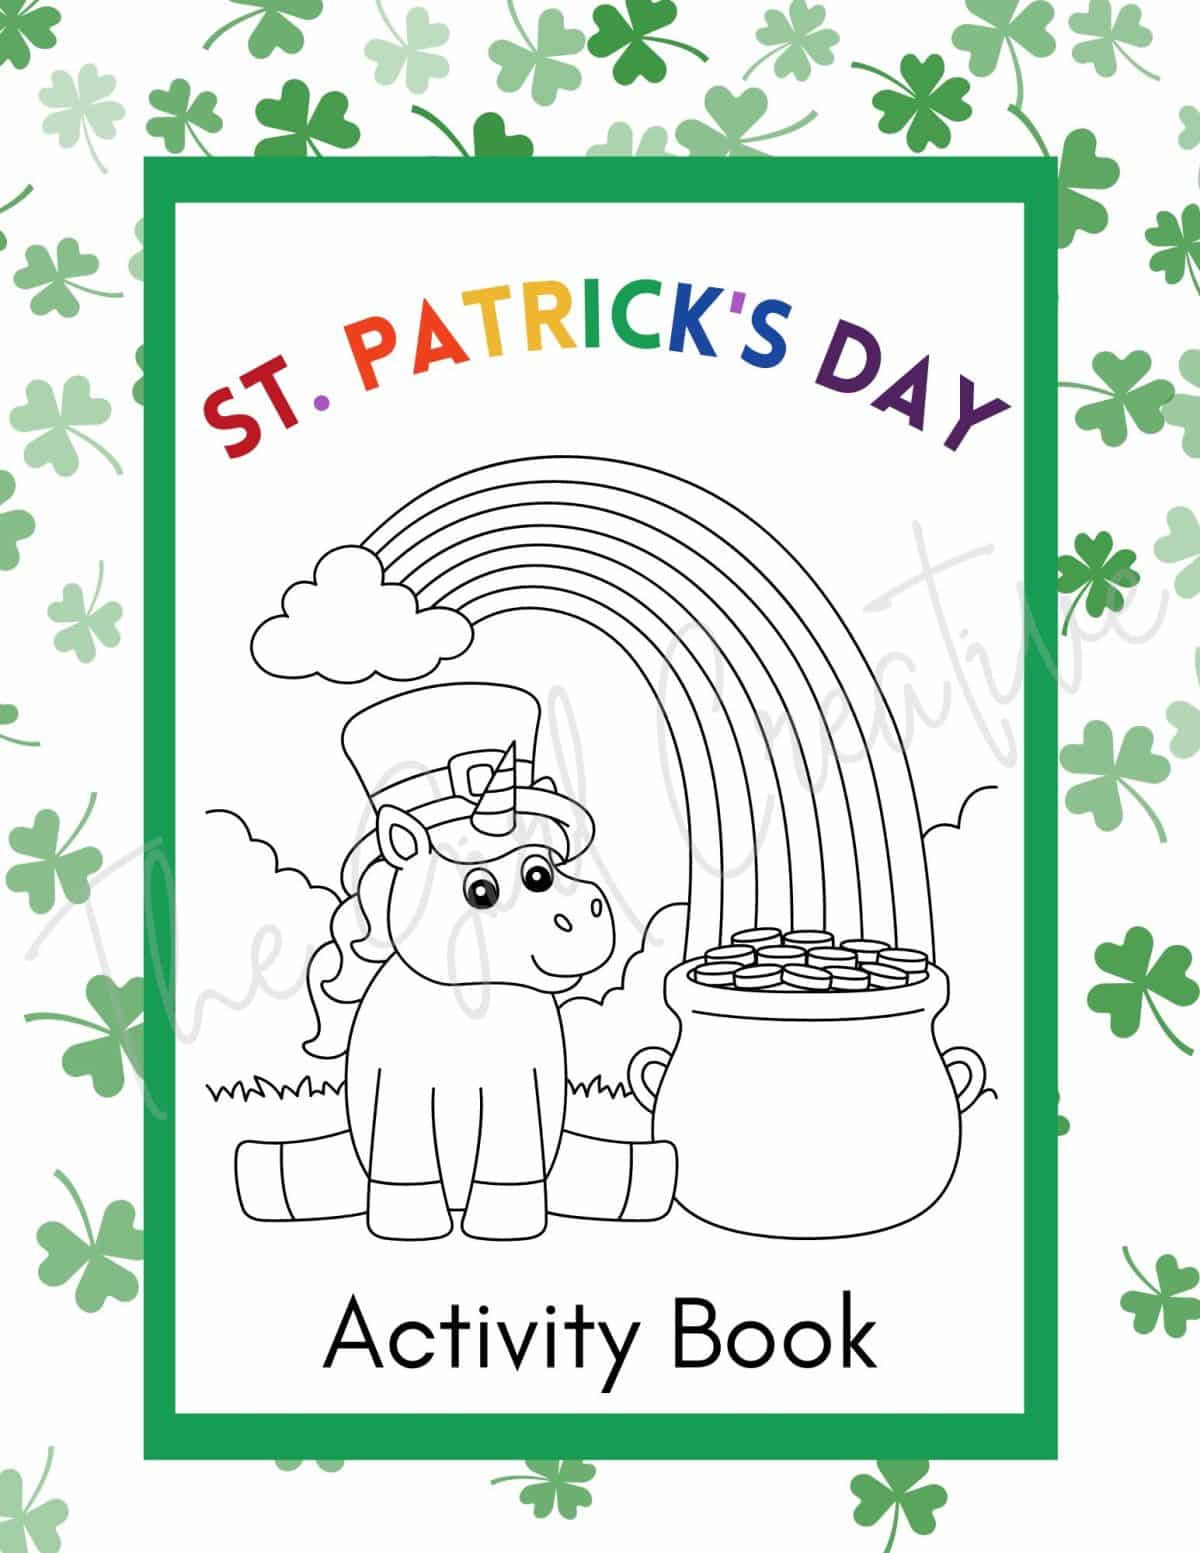 Unicorn with rainbow and pot of gold coloring page for St. Patrick's Day